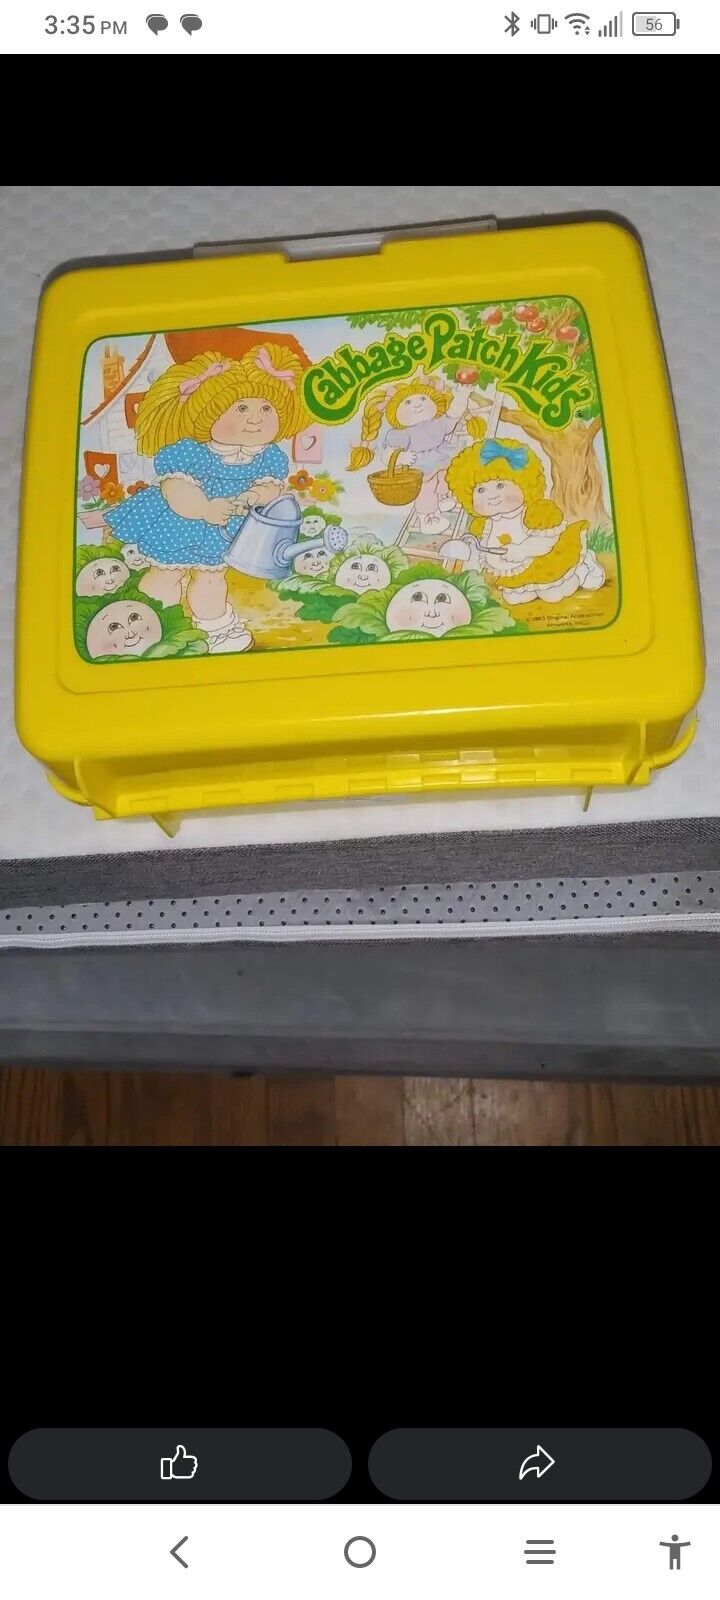 1983 Cabbage Patch Kids Plastic Lunchbox W/Thermos